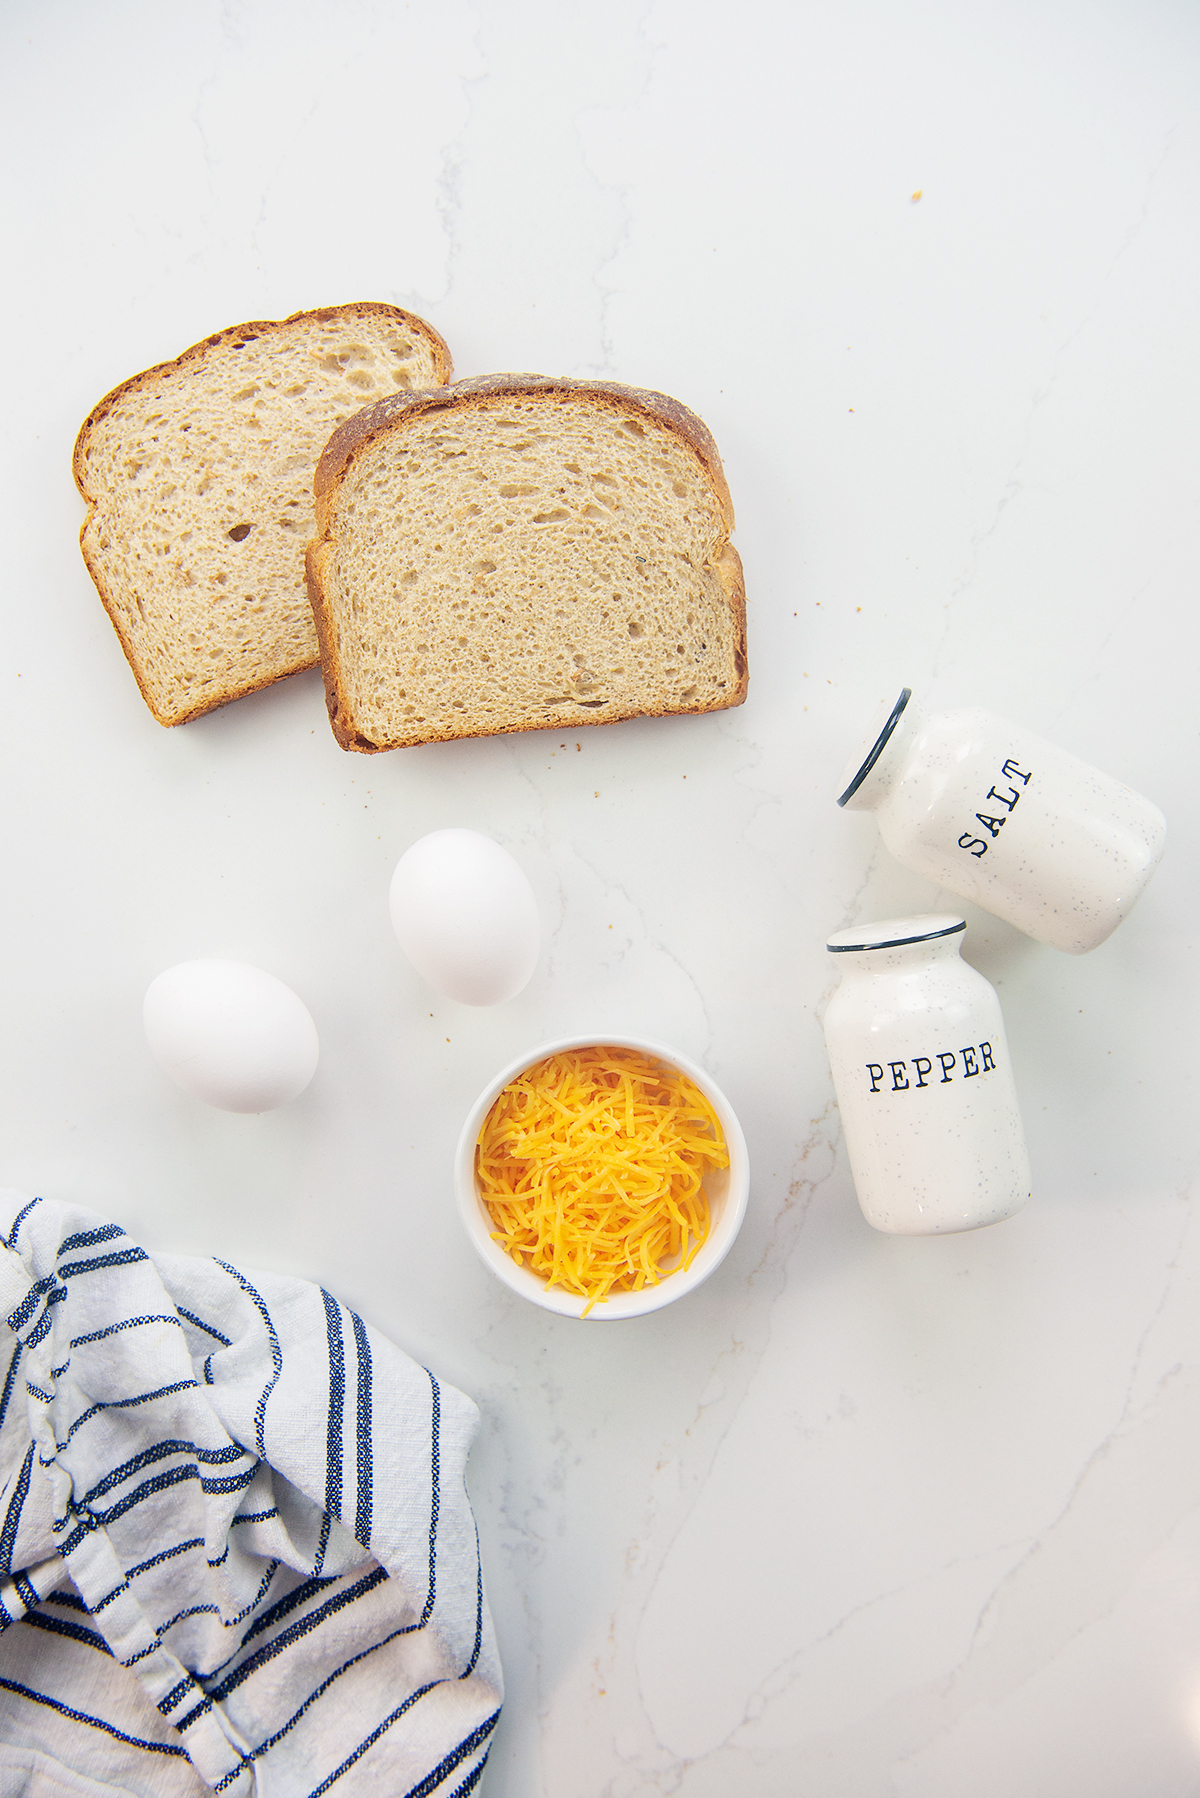 ingredients for egg and toast recipe.